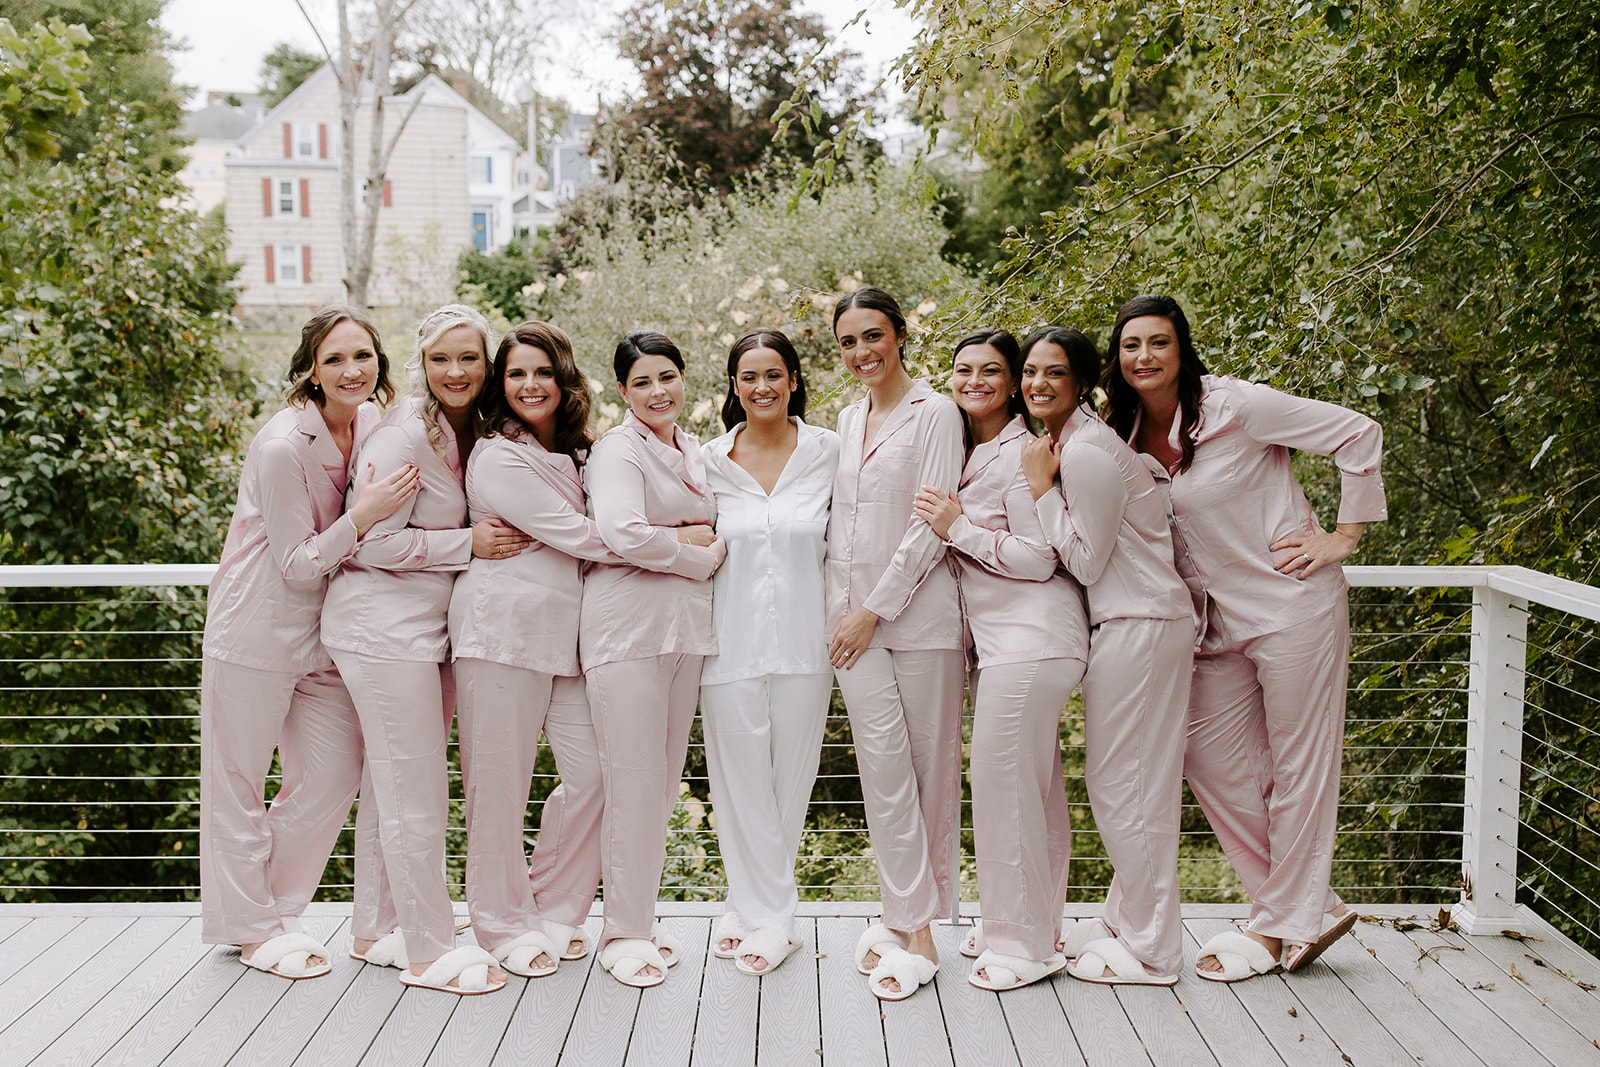 Bridesmaids pose with the stunning bride before her dreamy New England wedding day